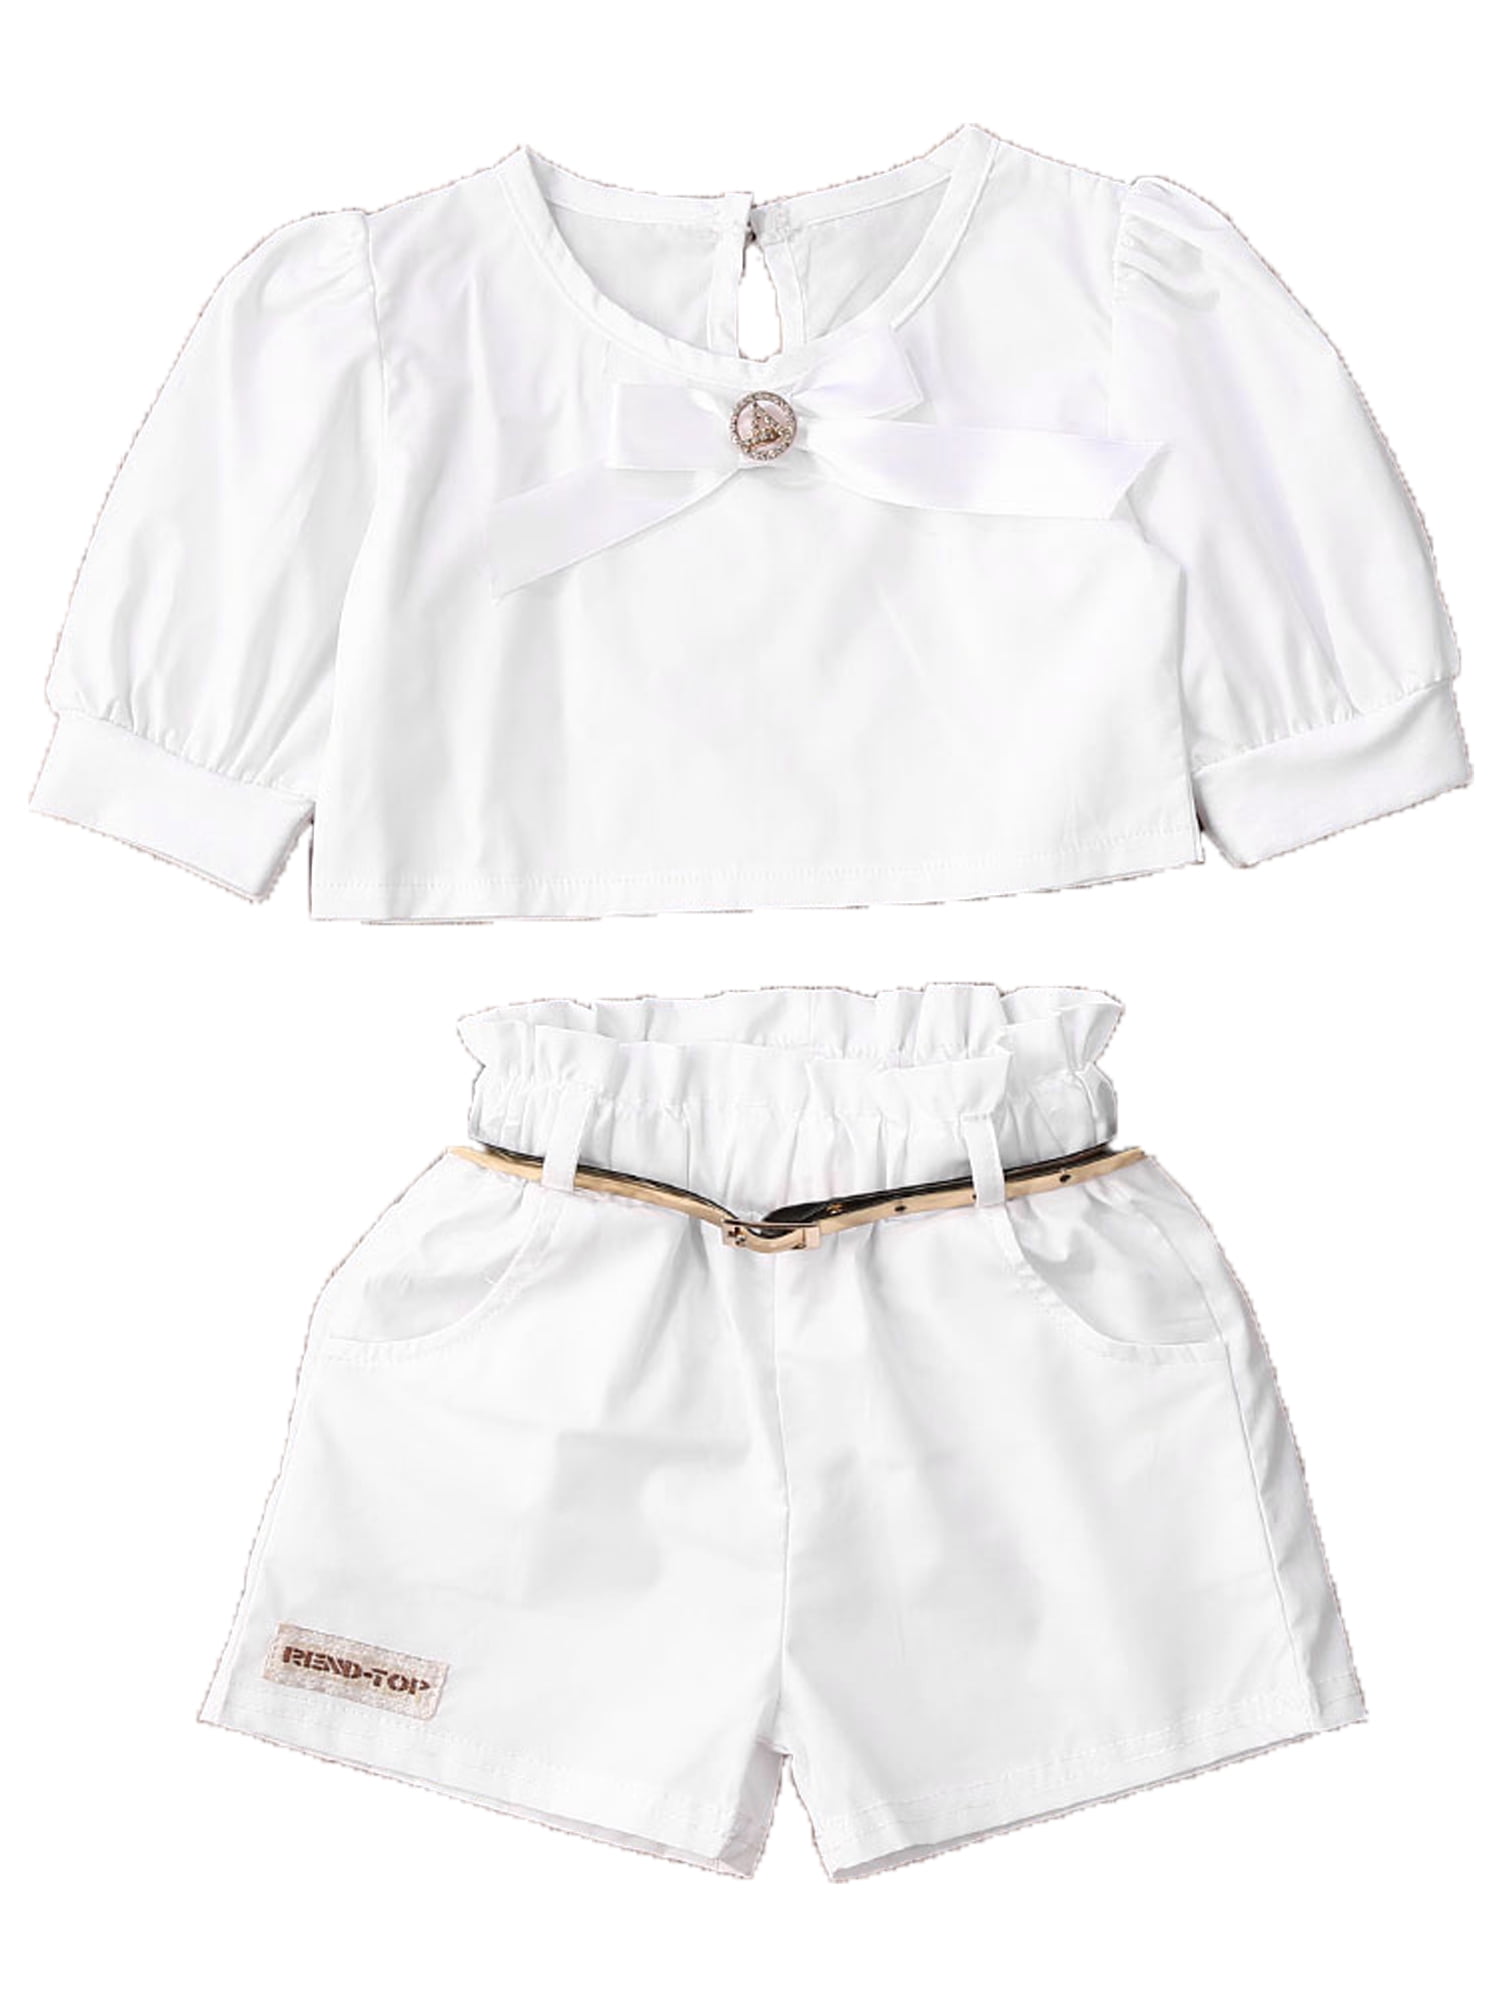 bubble outfits for baby girl